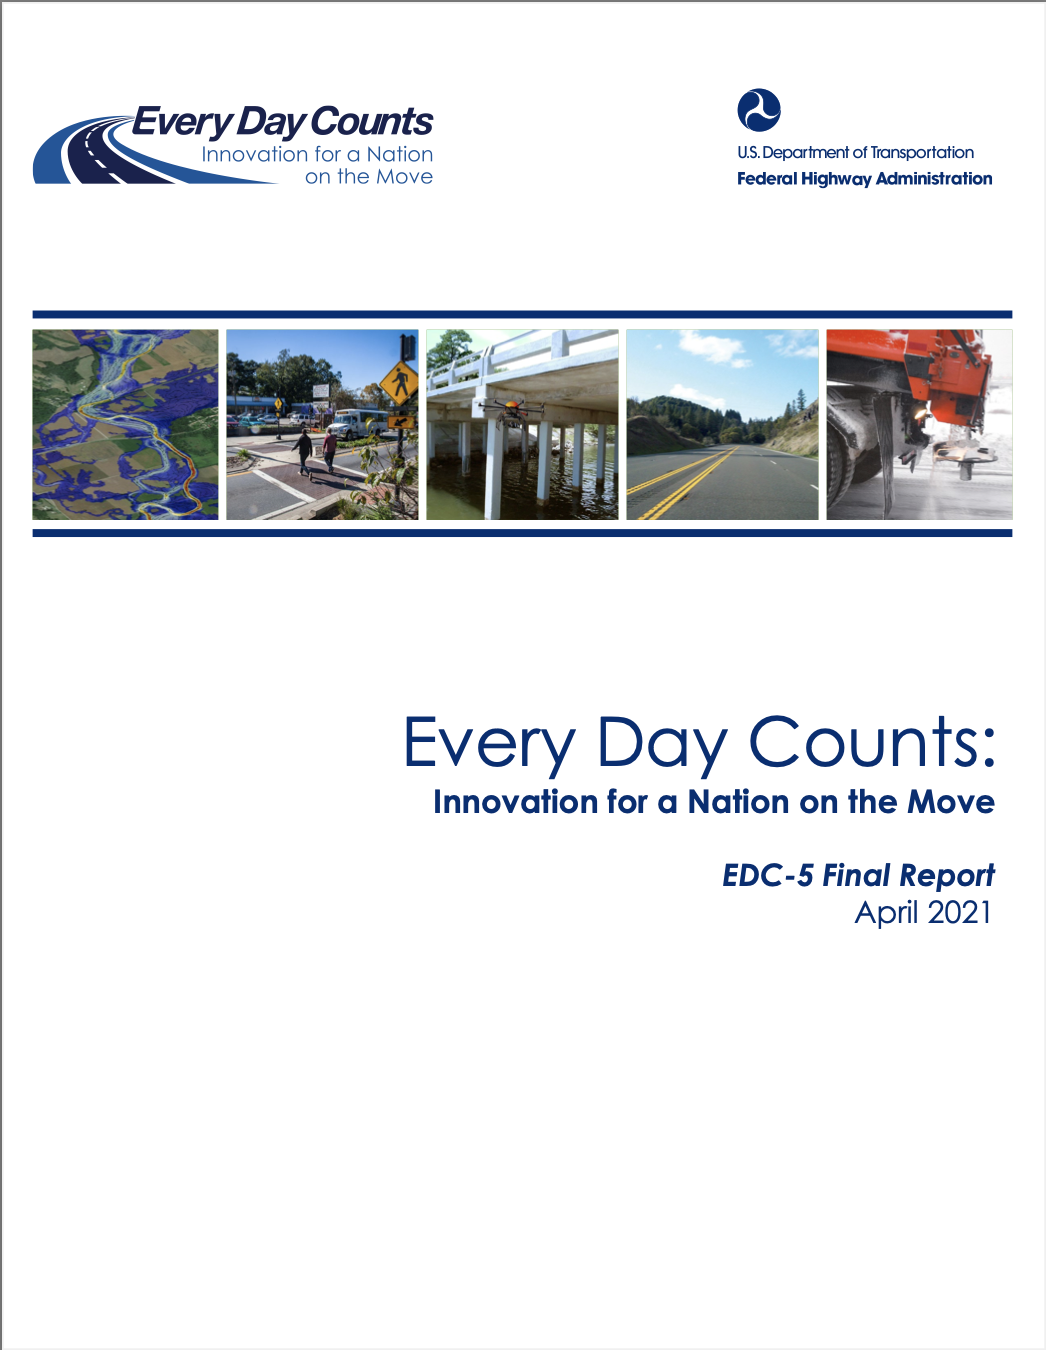 Image Reads: Every Day Counts: Innovation for a Nation on the Move, EDC-5 Final Report, April 2021